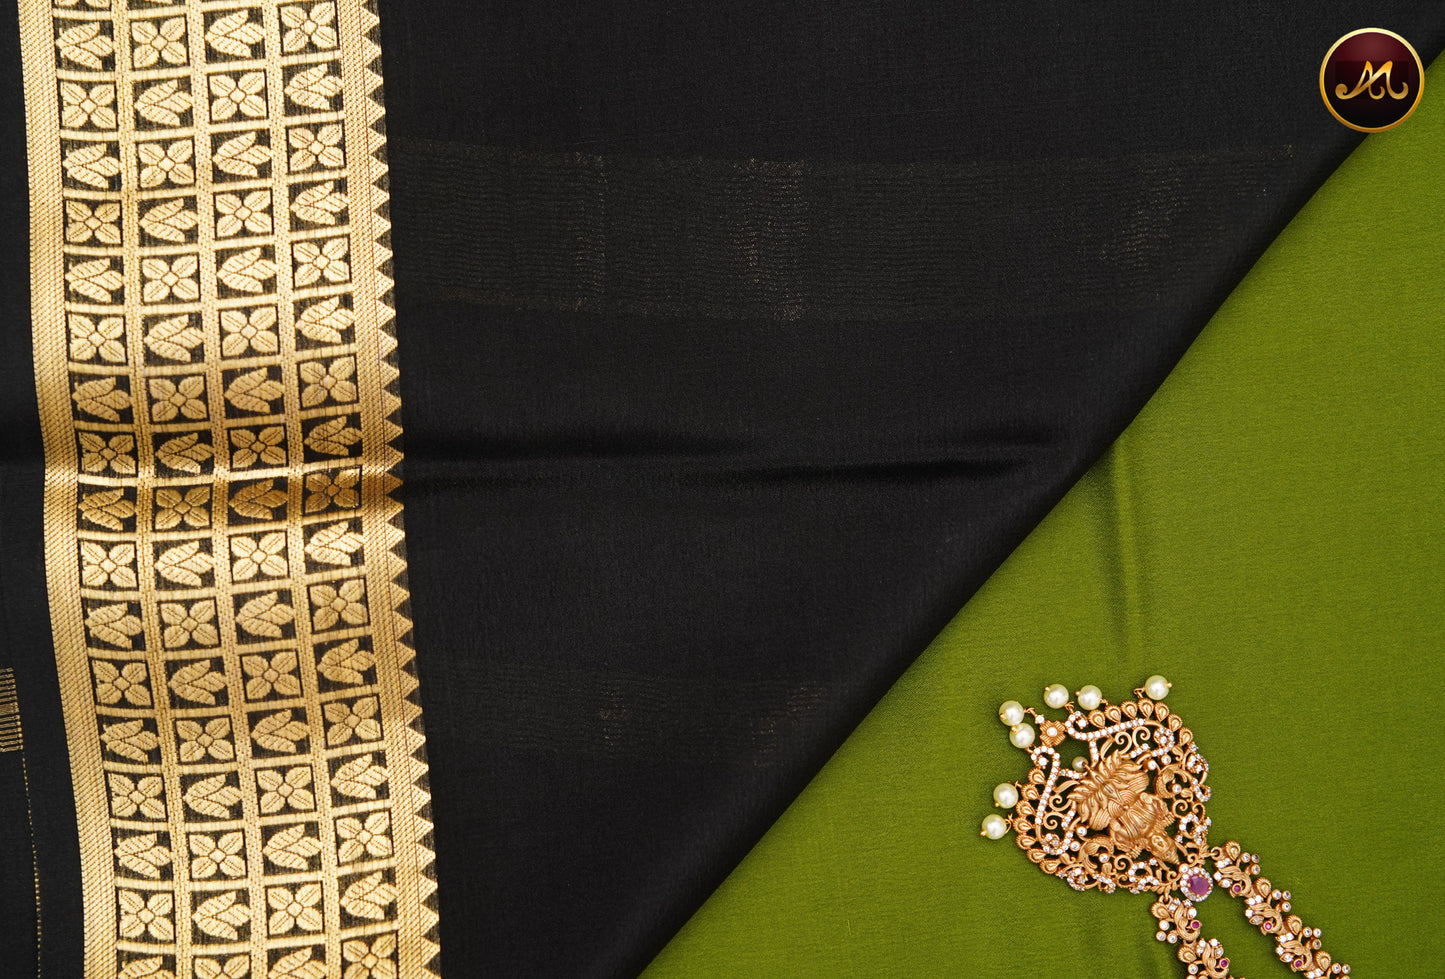 Mysore Crepe Silk saree with KSIC finish in Leaf Green  and Black combination with Gold Zari Border and Chit Pallu